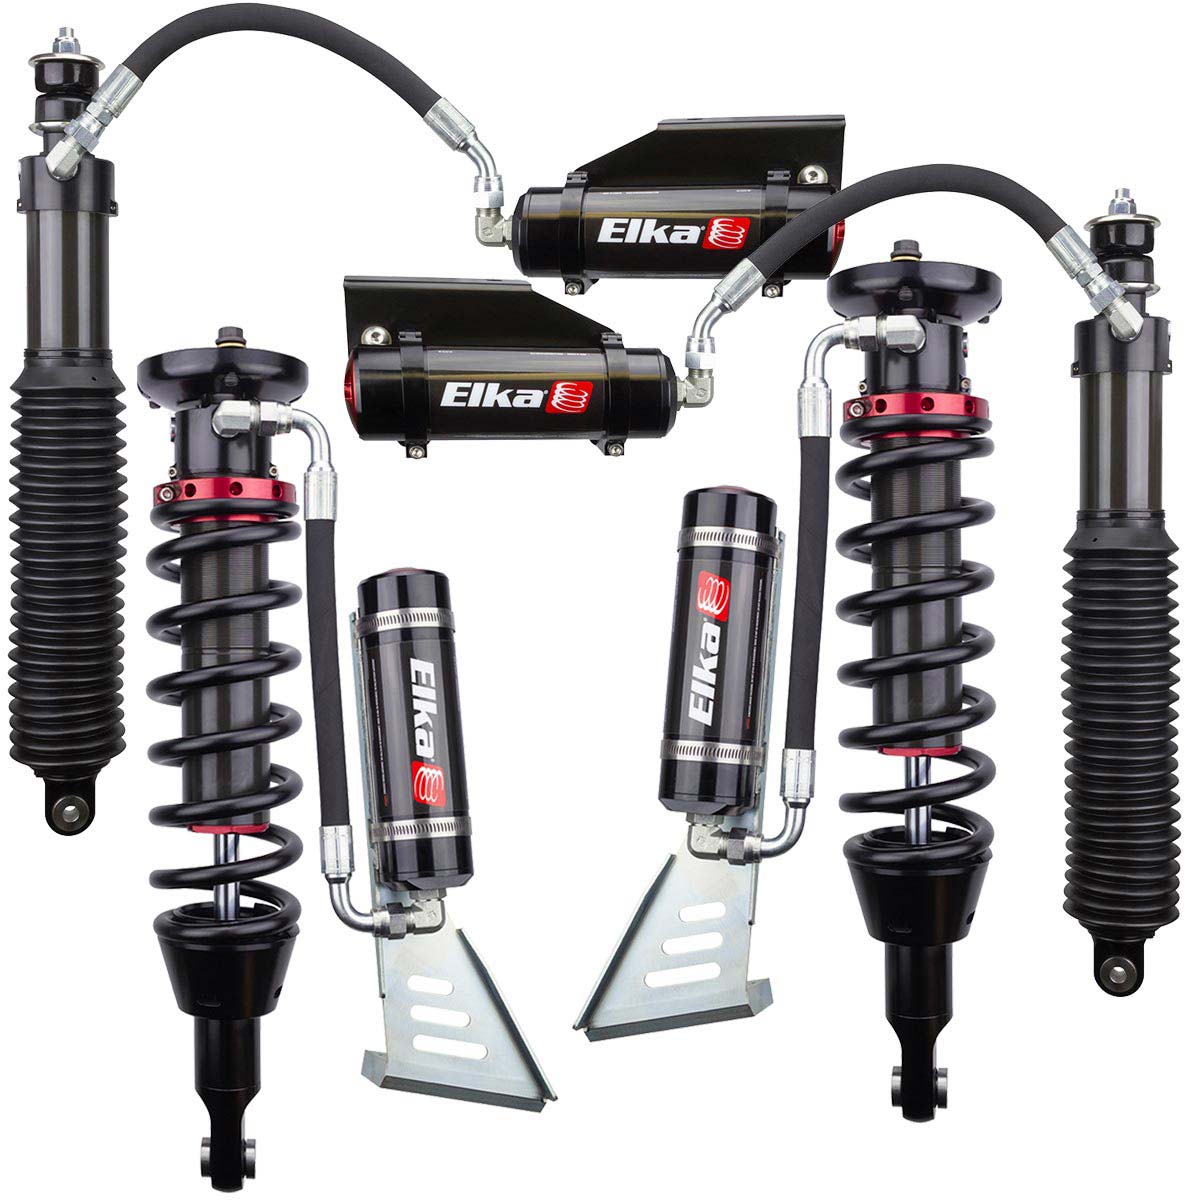 Elka 2.5 RESERVOIR FRONT & REAR SHOCKS KIT for TOYOTA 4RUNNER, 2010 to 2020 (with KDSS) (2 in. to 3 in. lift)